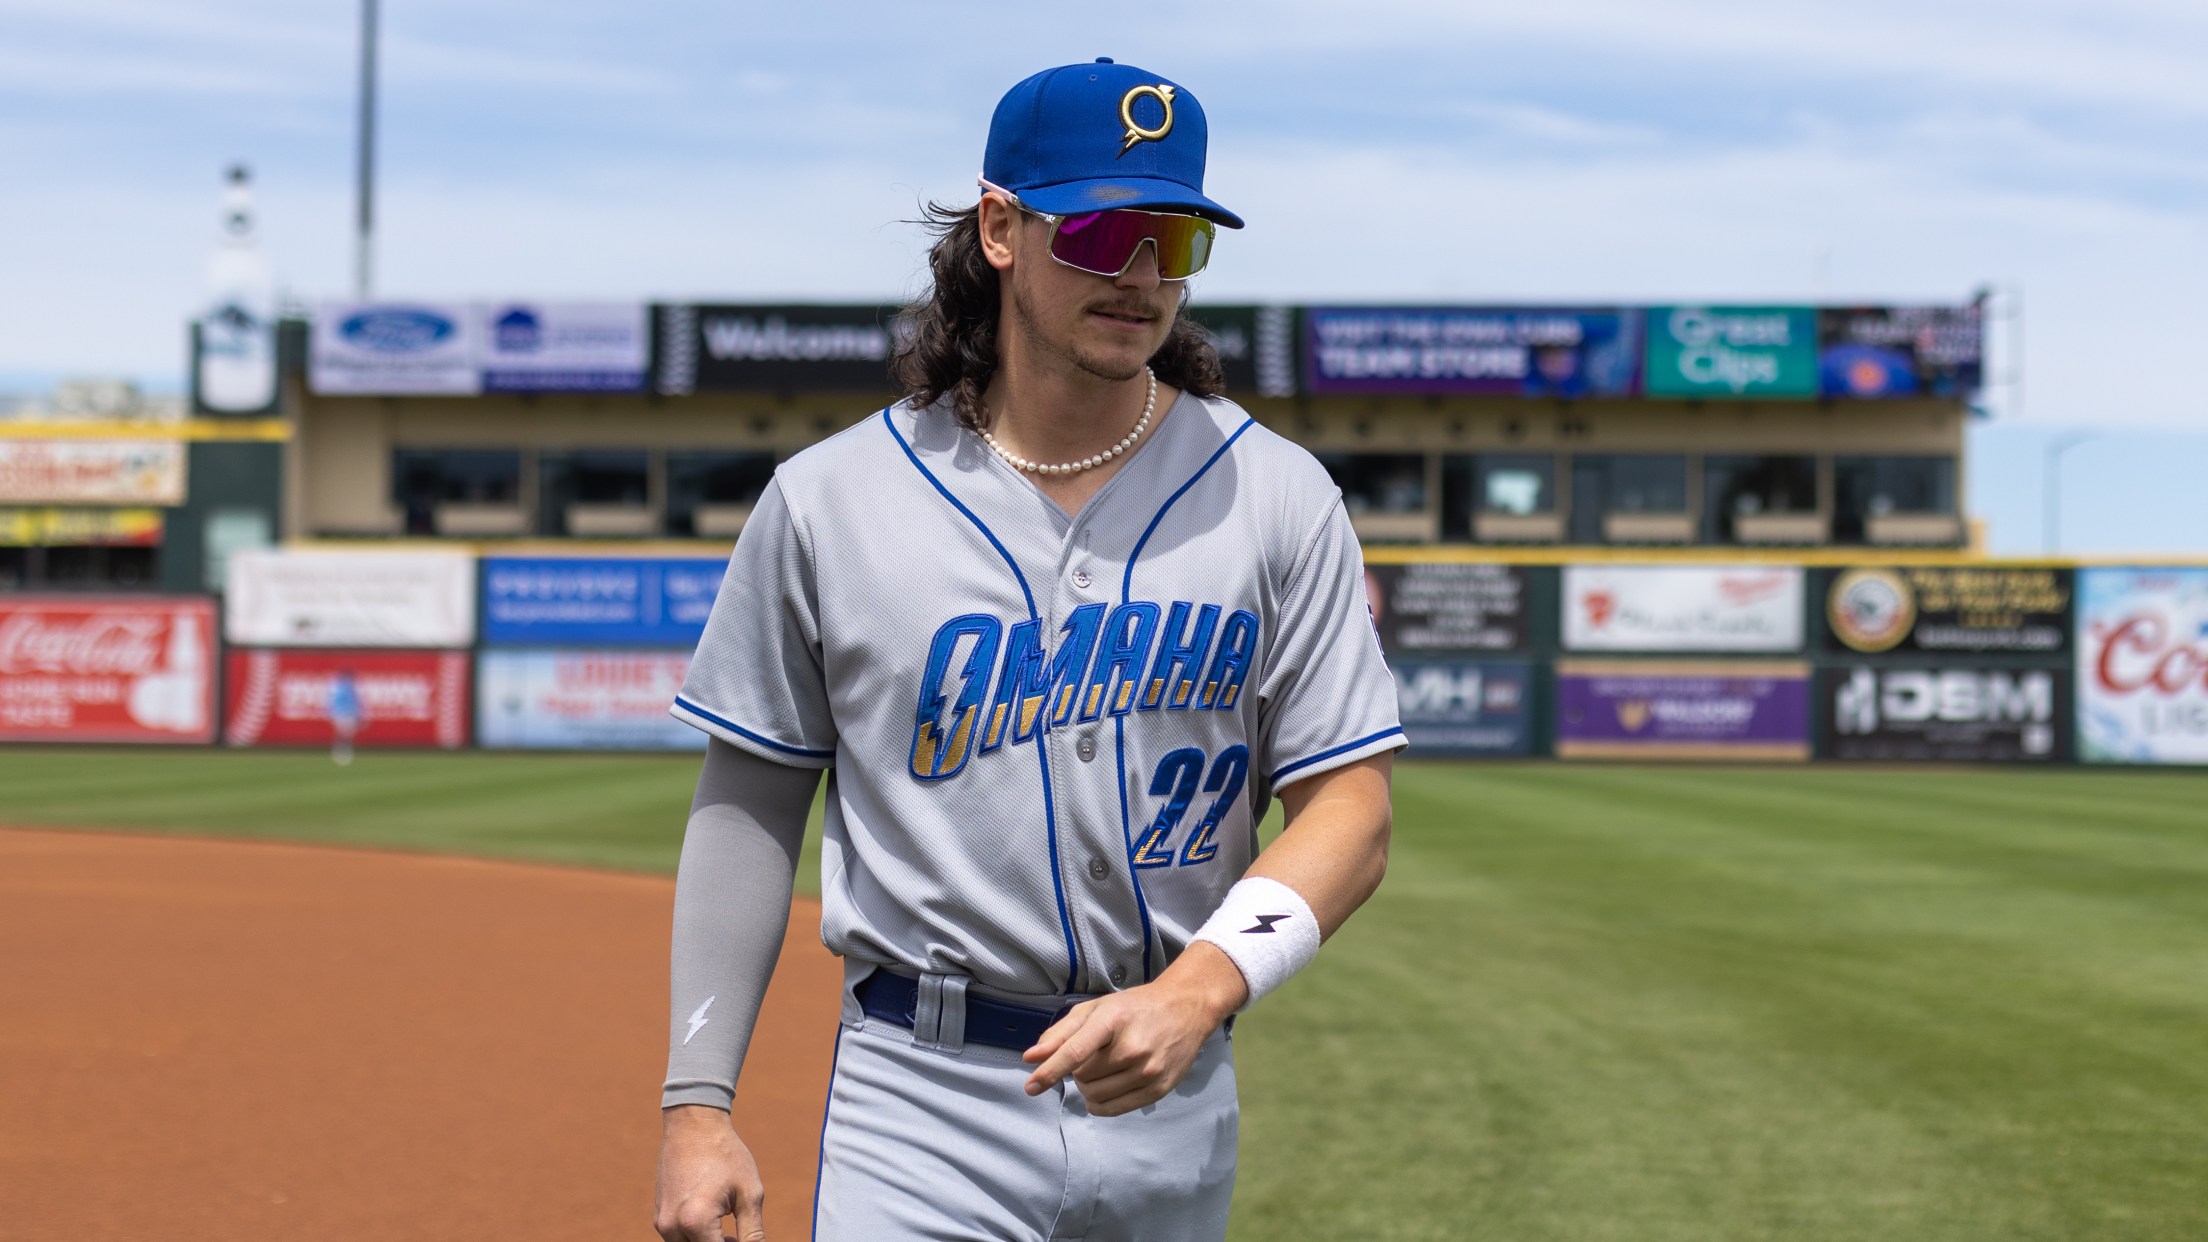 Full of Fitz: Storm Chasers Rough Up St. Paul 11-2